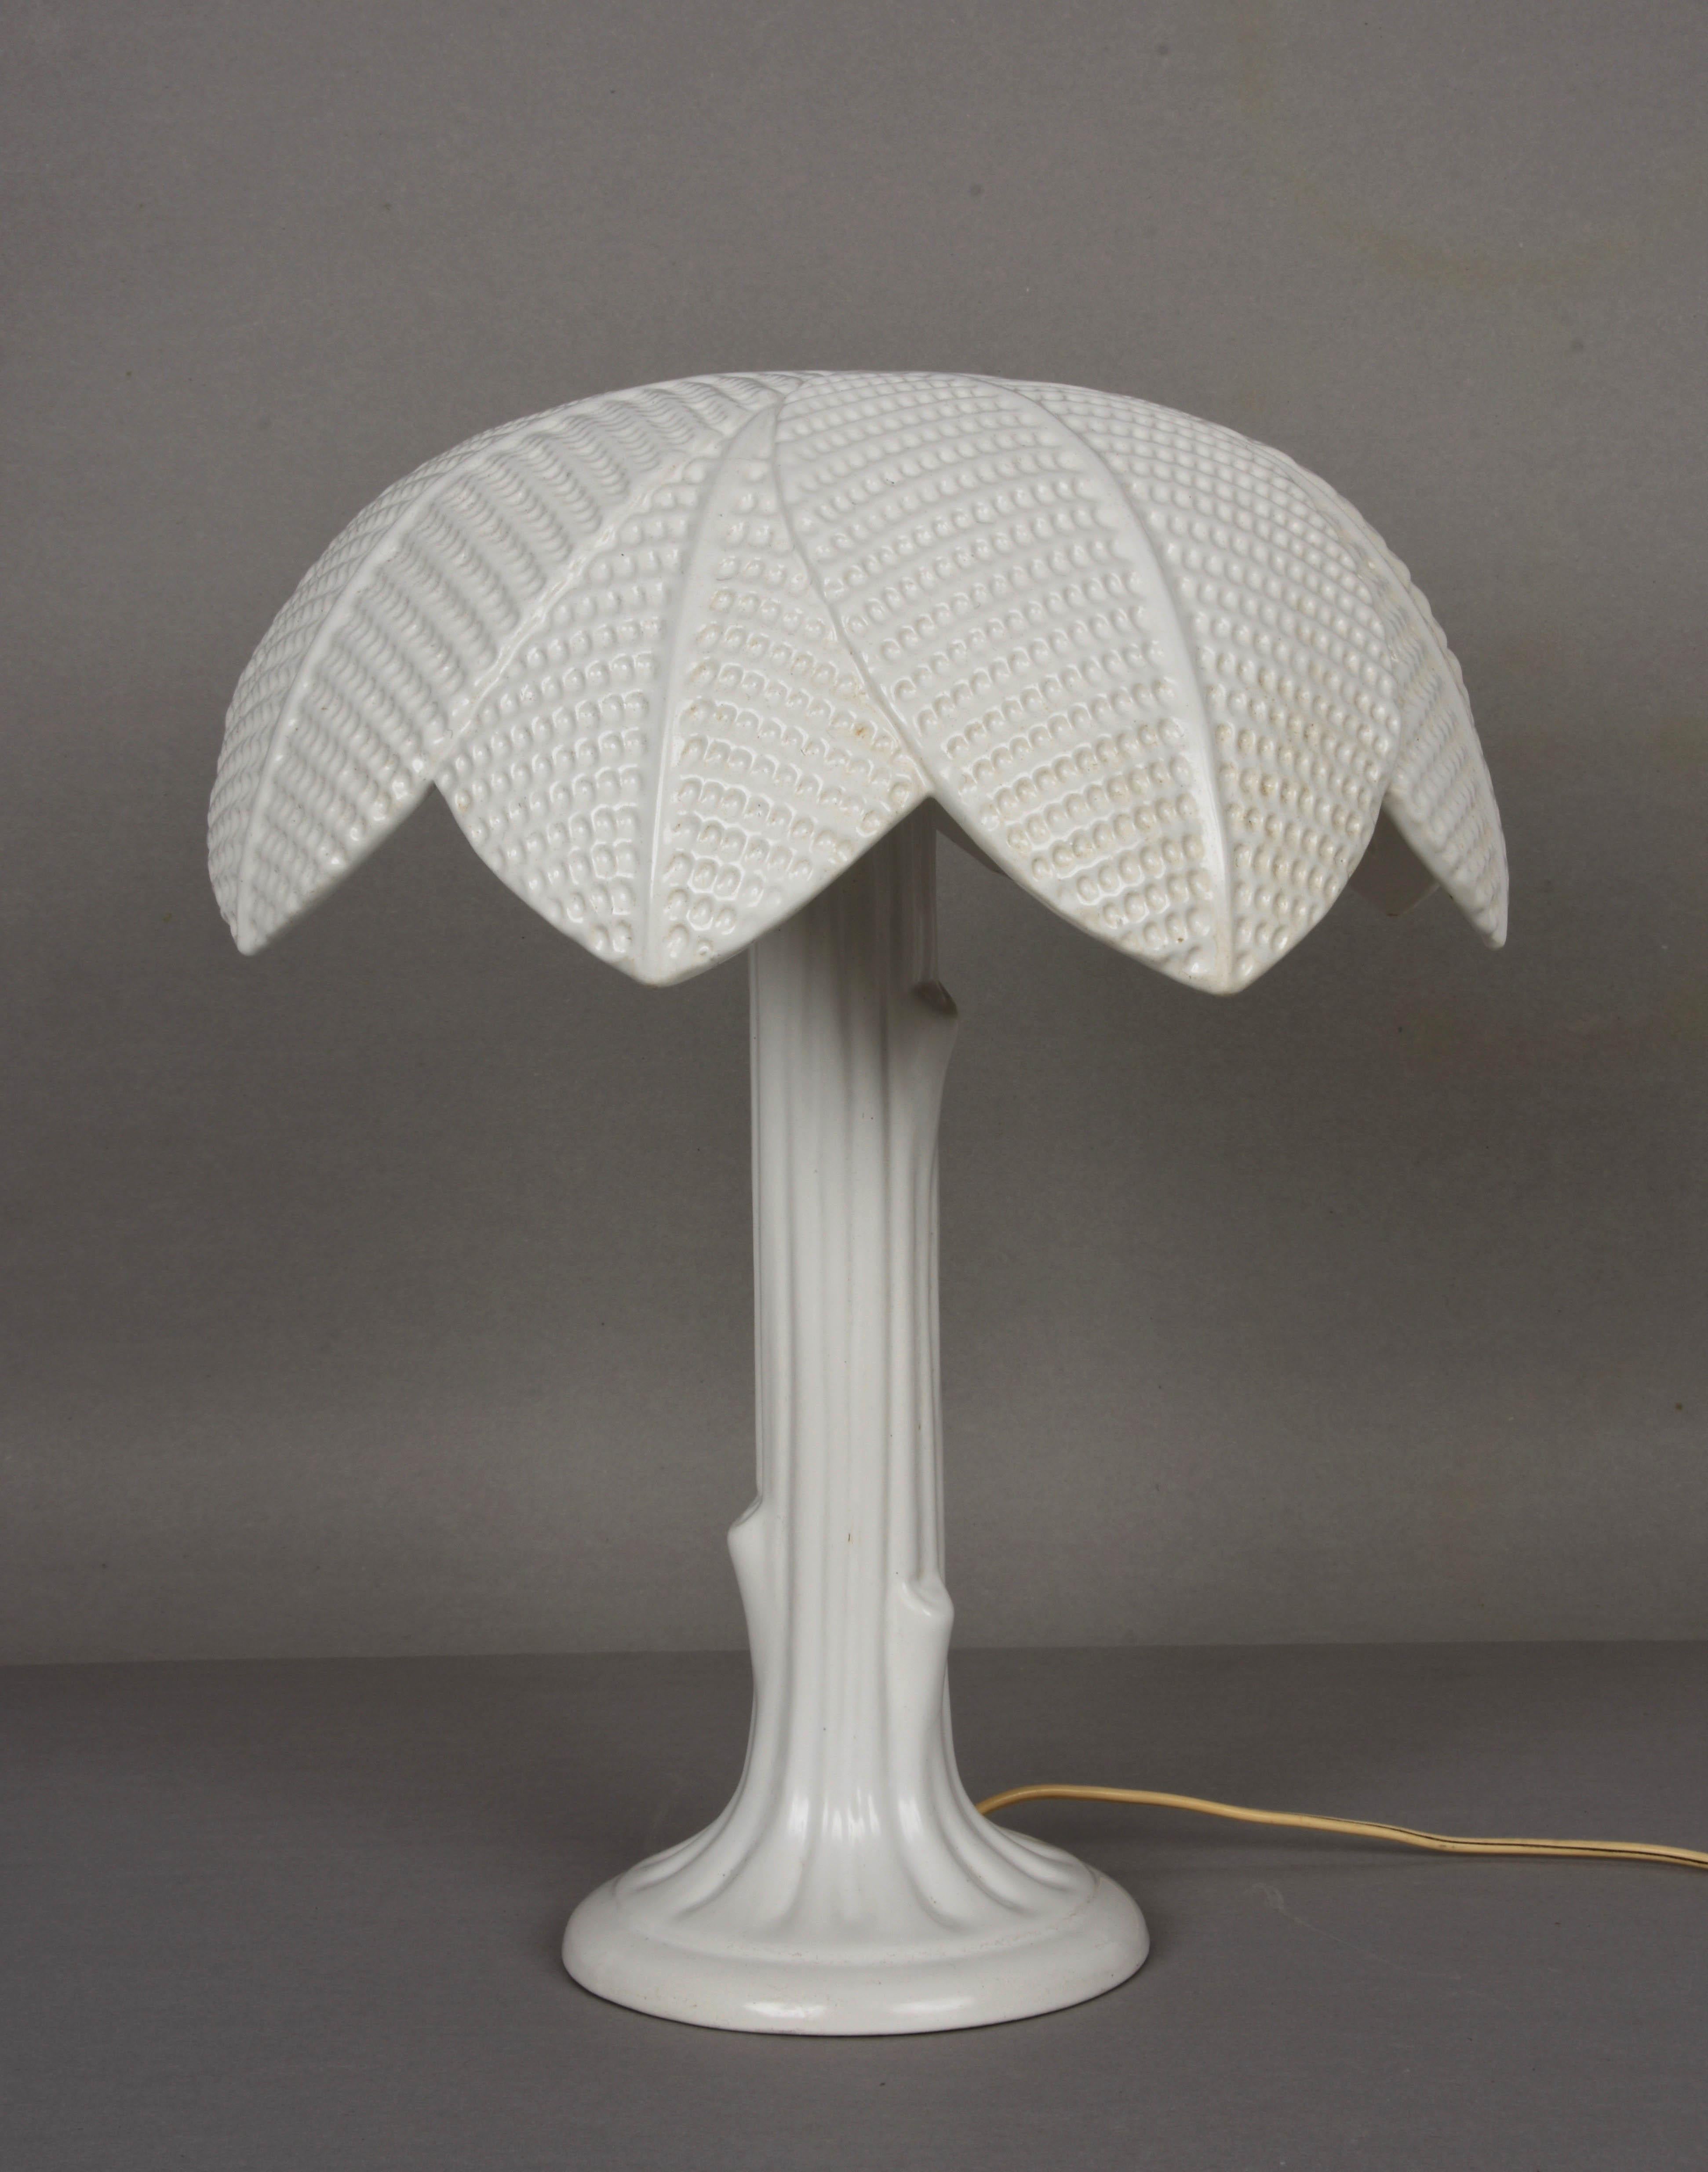 Beautiful white glazed ceramic table lamp in the shape of a palm tree. This fantastic item was designed and signed by Tommaso Barbi for a B Ceramiche Italian production from the 1970s.

This piece is one of a kind because of the attention to